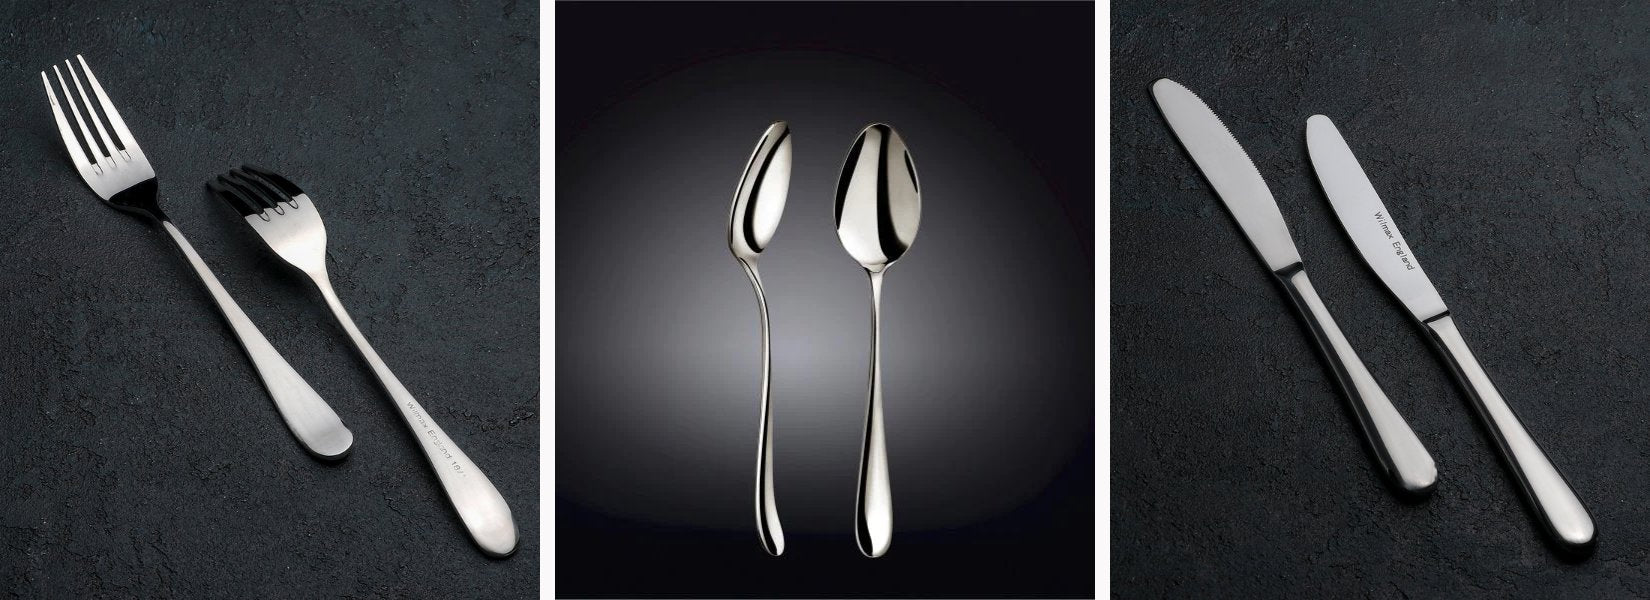 Stainless Steel Fish Serving Knife and Serving Fork Two (2) Piece Serving Set Great for Entertaining